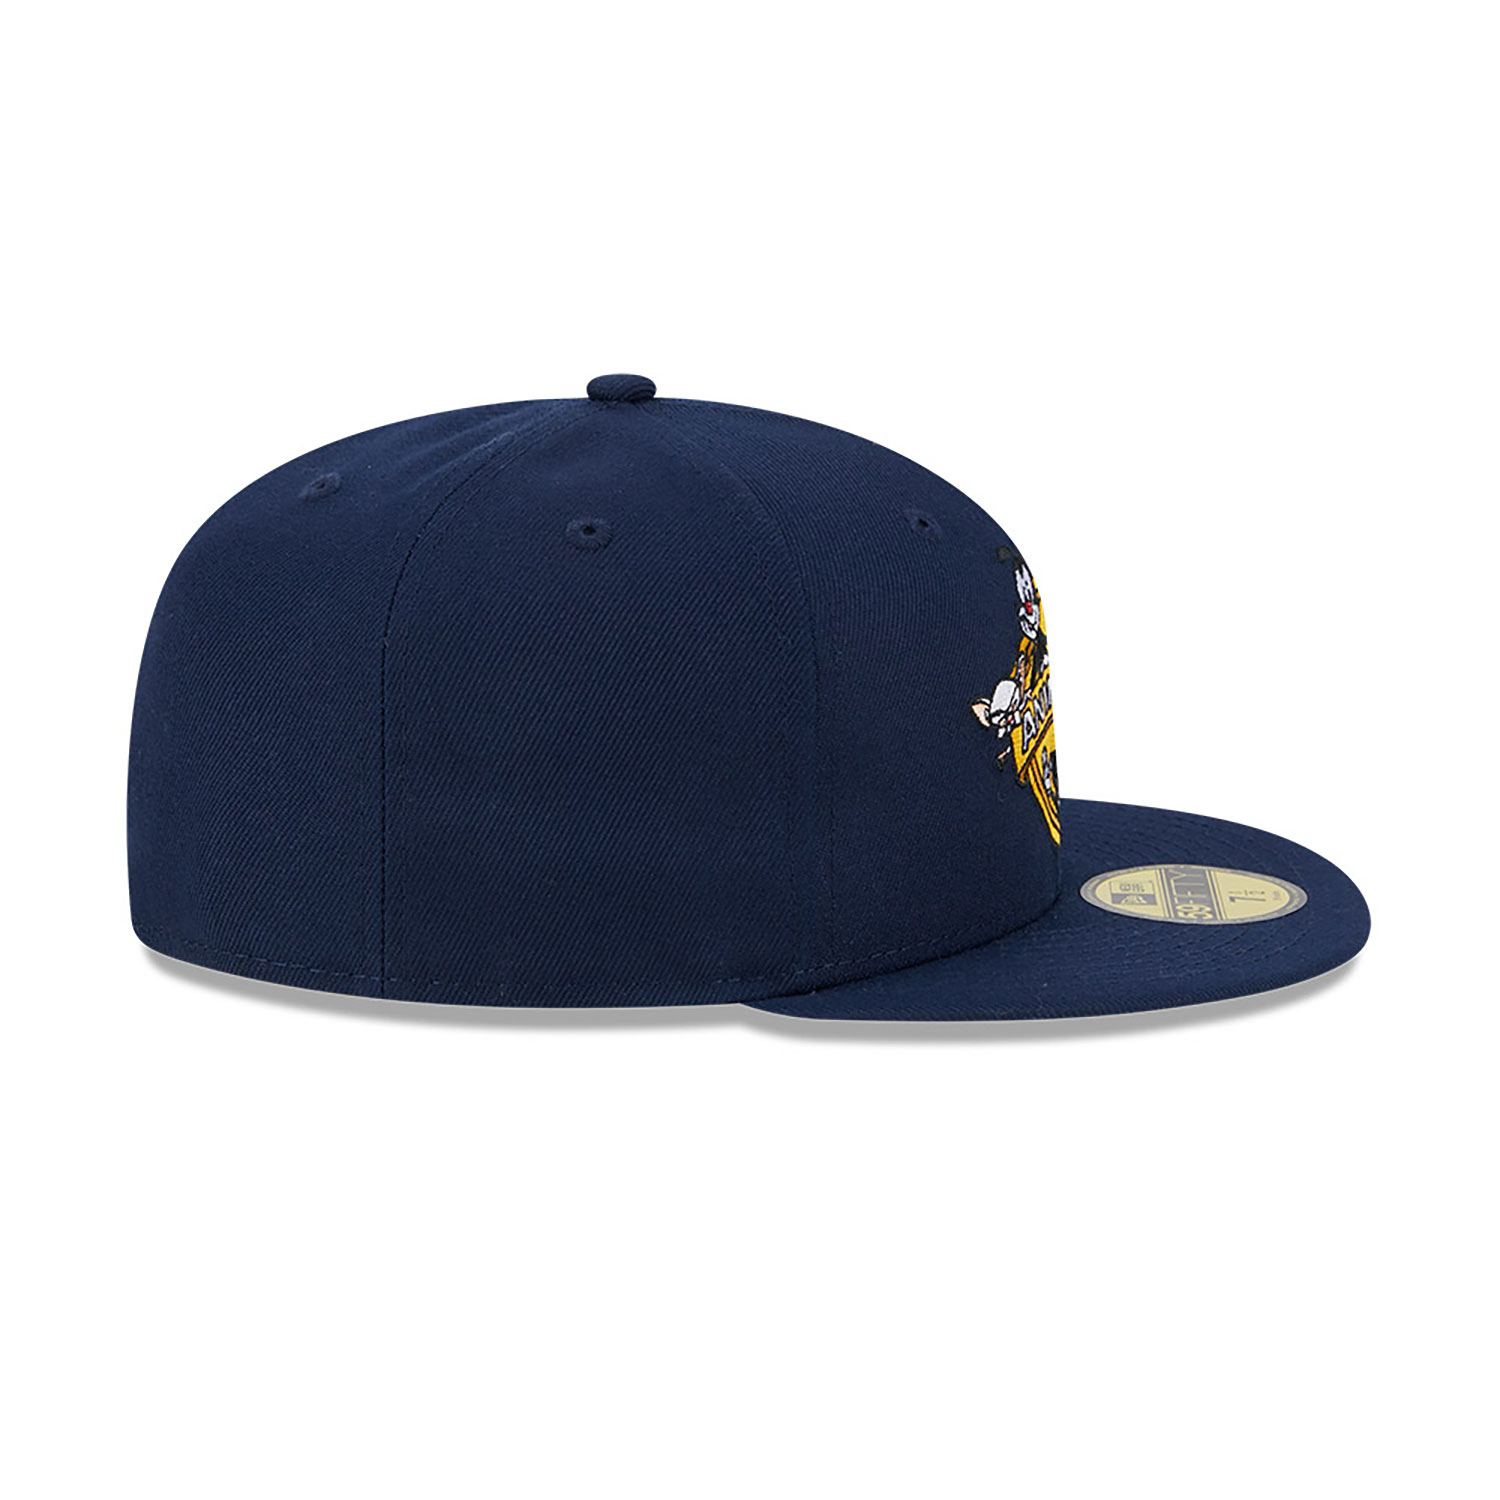 Warner Brothers Animaniacs Dark Blue 59FIFTY Fitted Cap